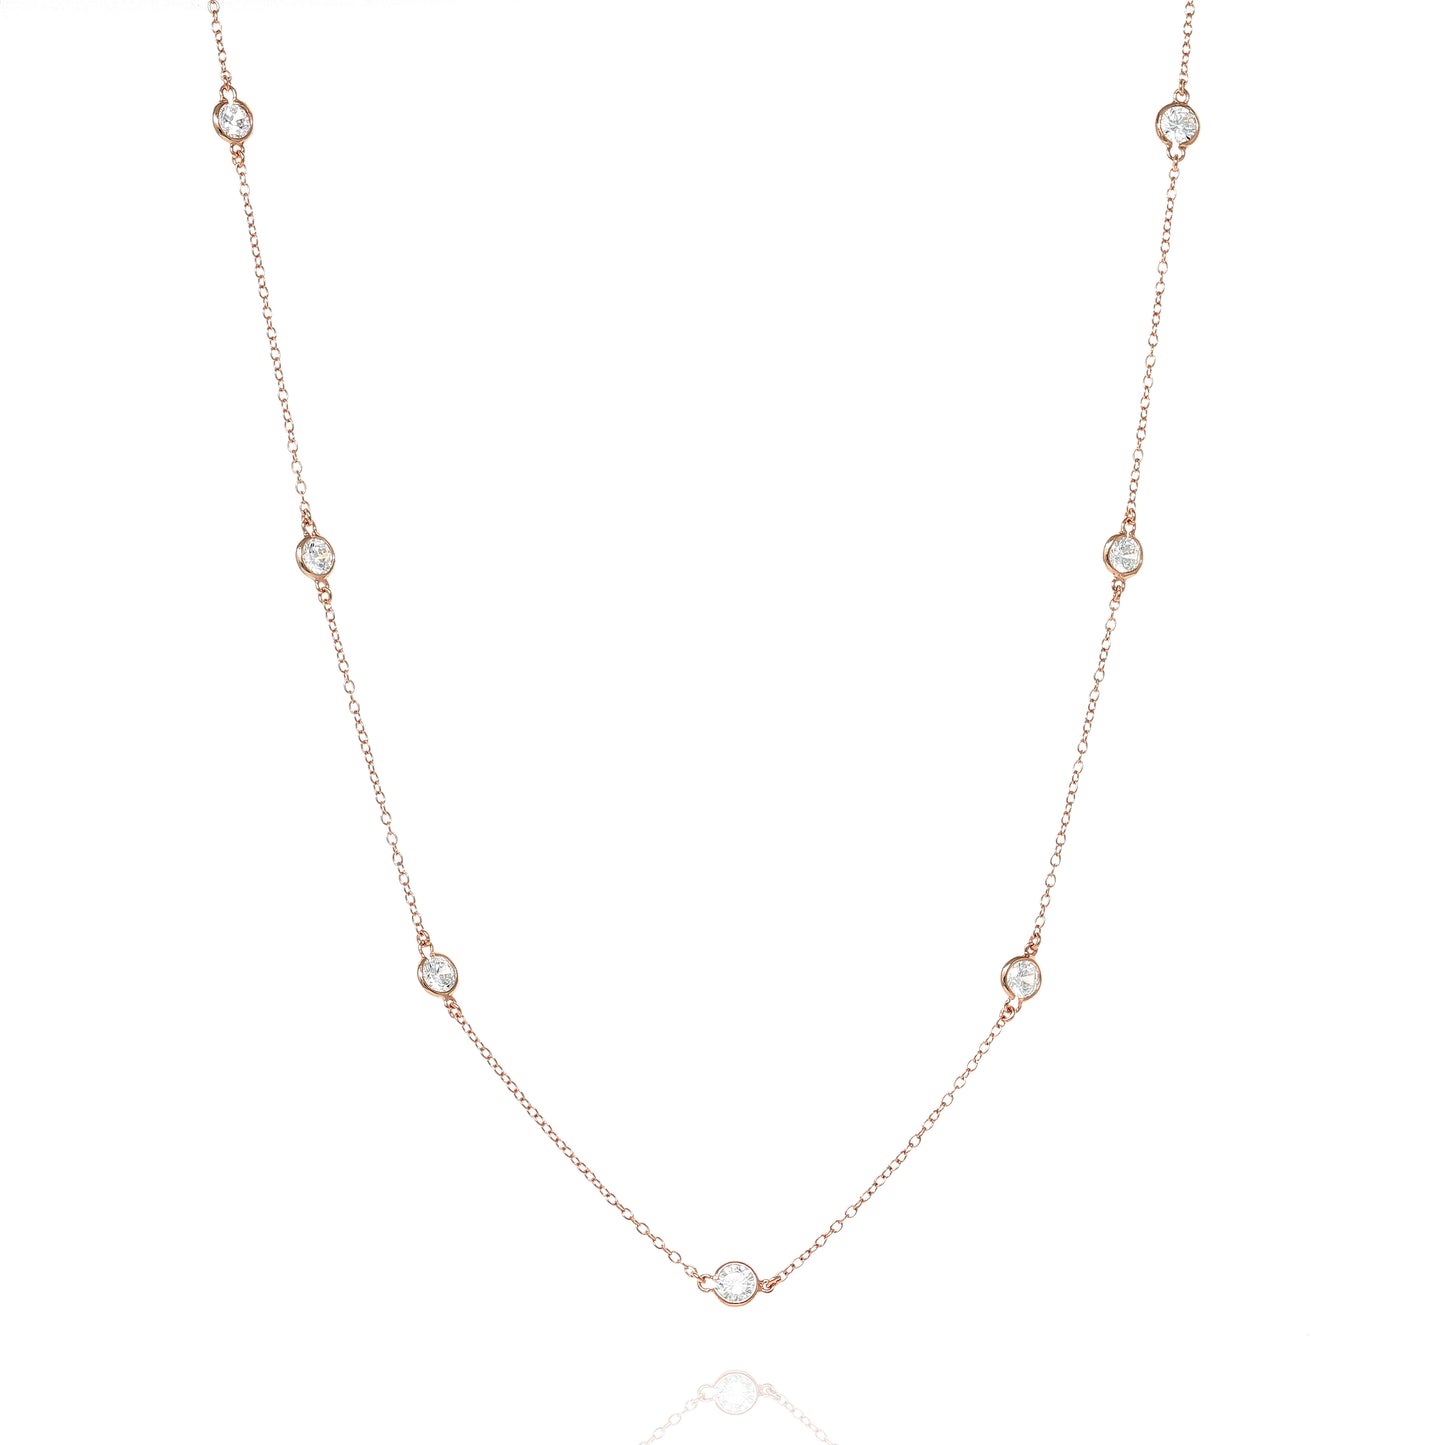 NK-81/R - Long Chain Necklace with Cubic Zirconia